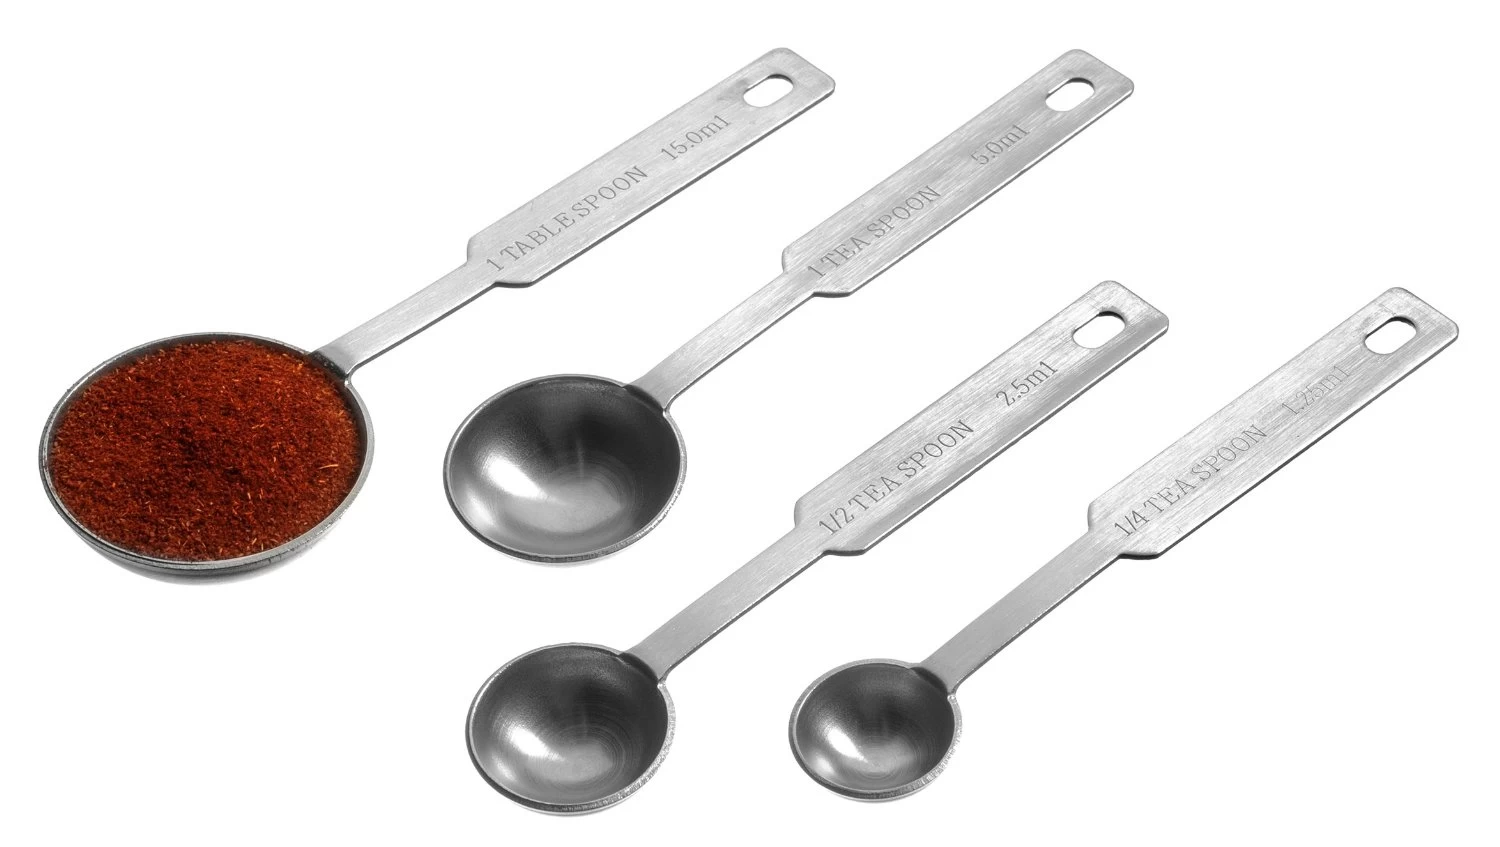 Accurate Stainless Steel Measuring Spoon Set